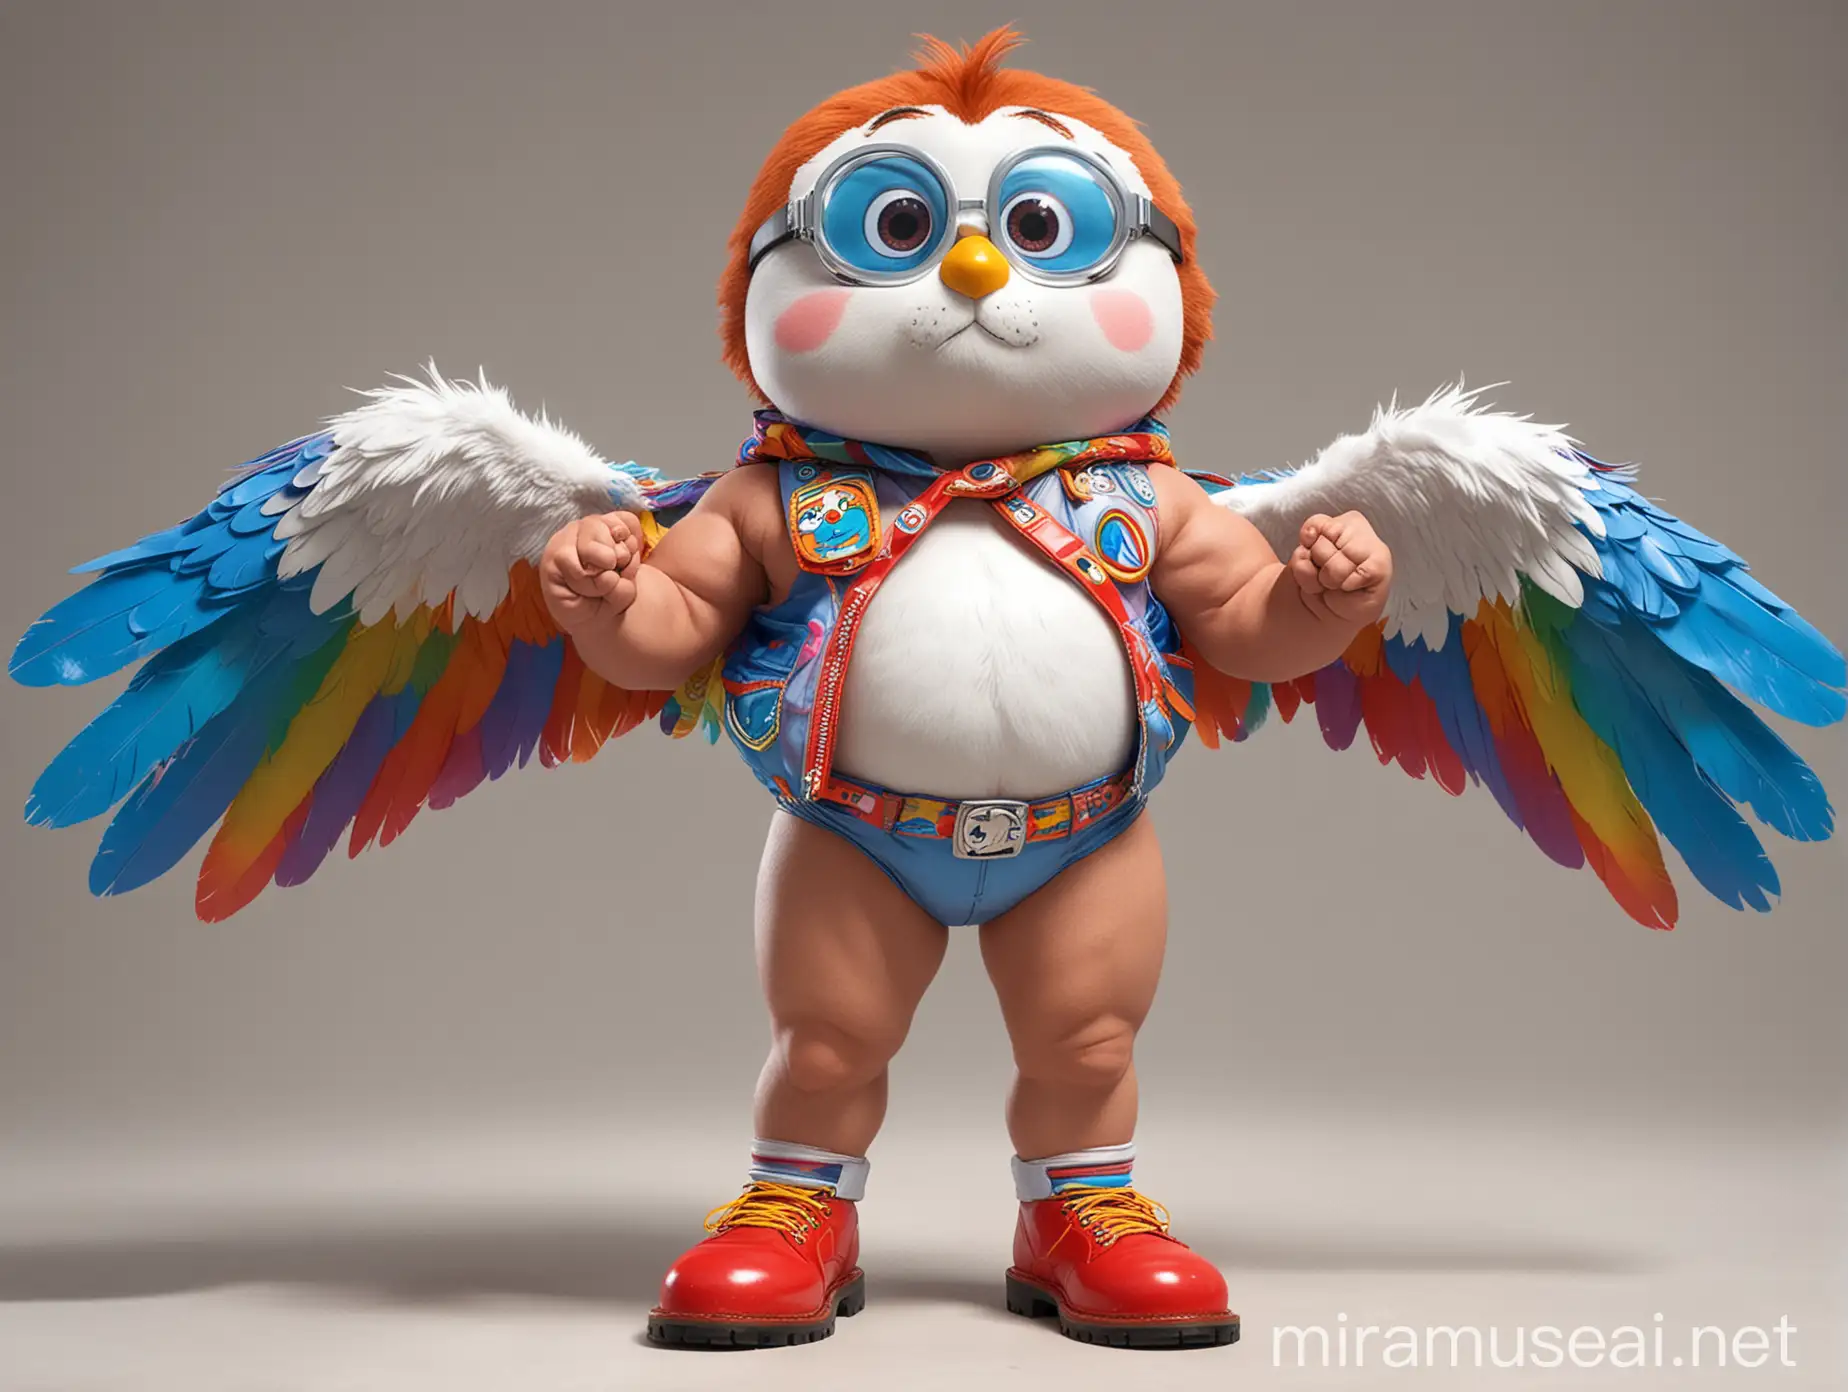 Big Eyes Subtle Smile Topless 40s Ultra beefy Red Head Bodybuilder Daddy with Beard Wearing Multi-Highlighter Bright Rainbow Colored See Through huge Eagle Wings Shoulder Jacket short shorts long legs short boots and Flexing his Big Strong Arm Up with Doraemon Goggles on forehead side pose